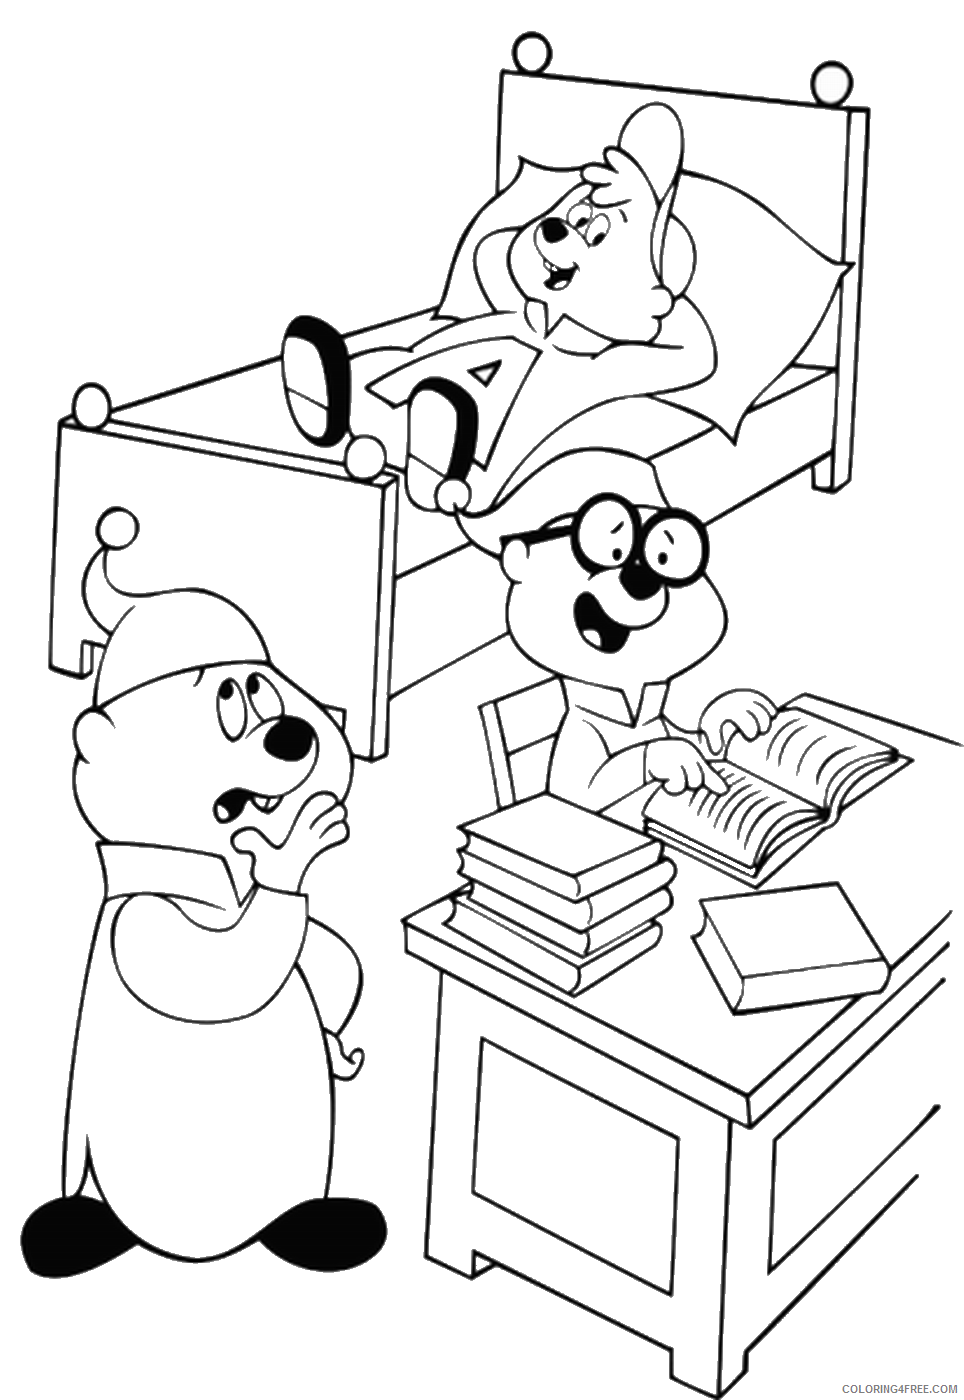 Alvin and the Chipmunks Coloring Pages TV Film alvin_cl_1 Printable 2020 00049 Coloring4free